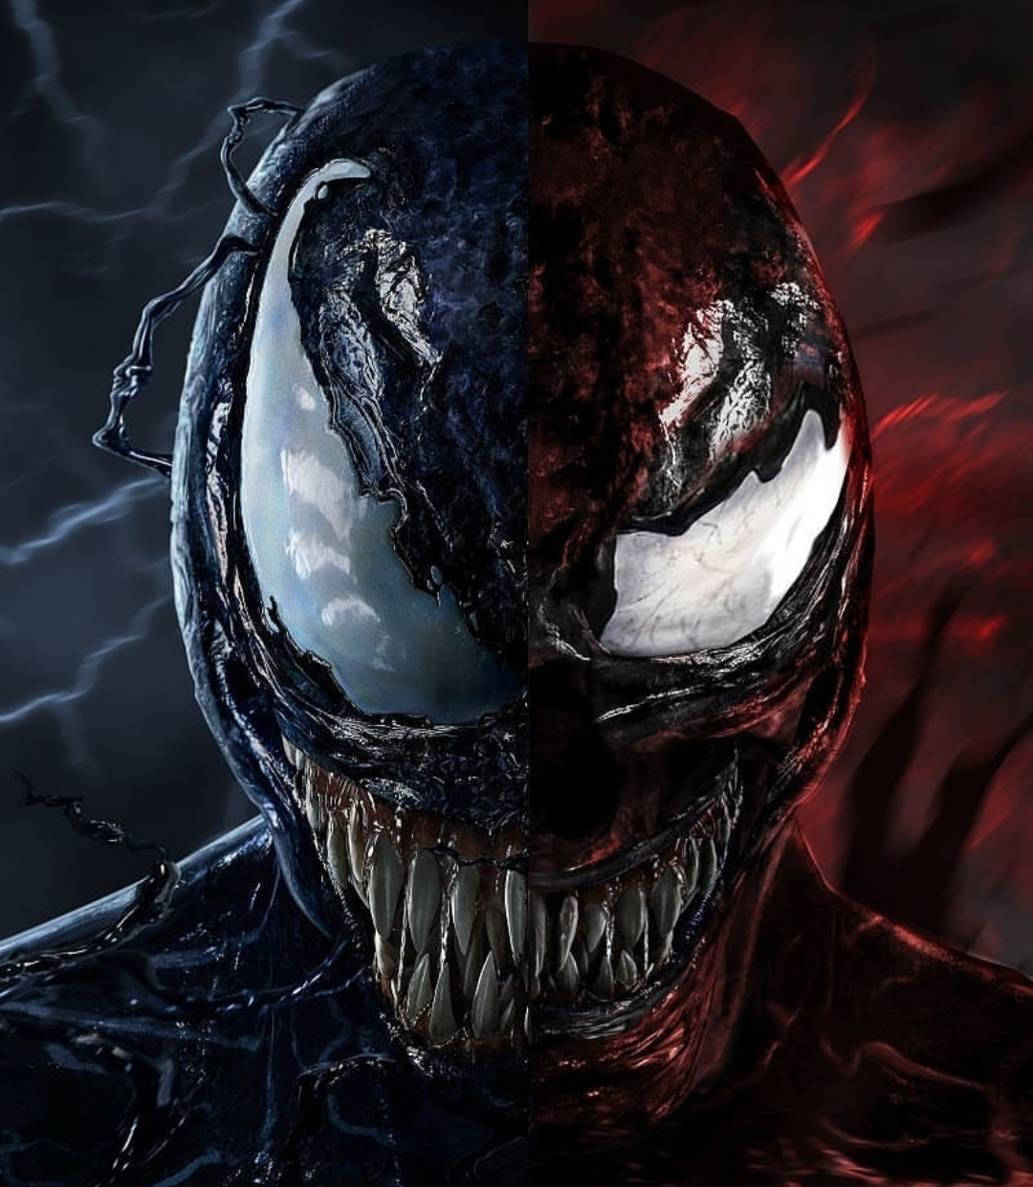 Venom and Carnage square off in a fight for control over NYC. Wallpaper